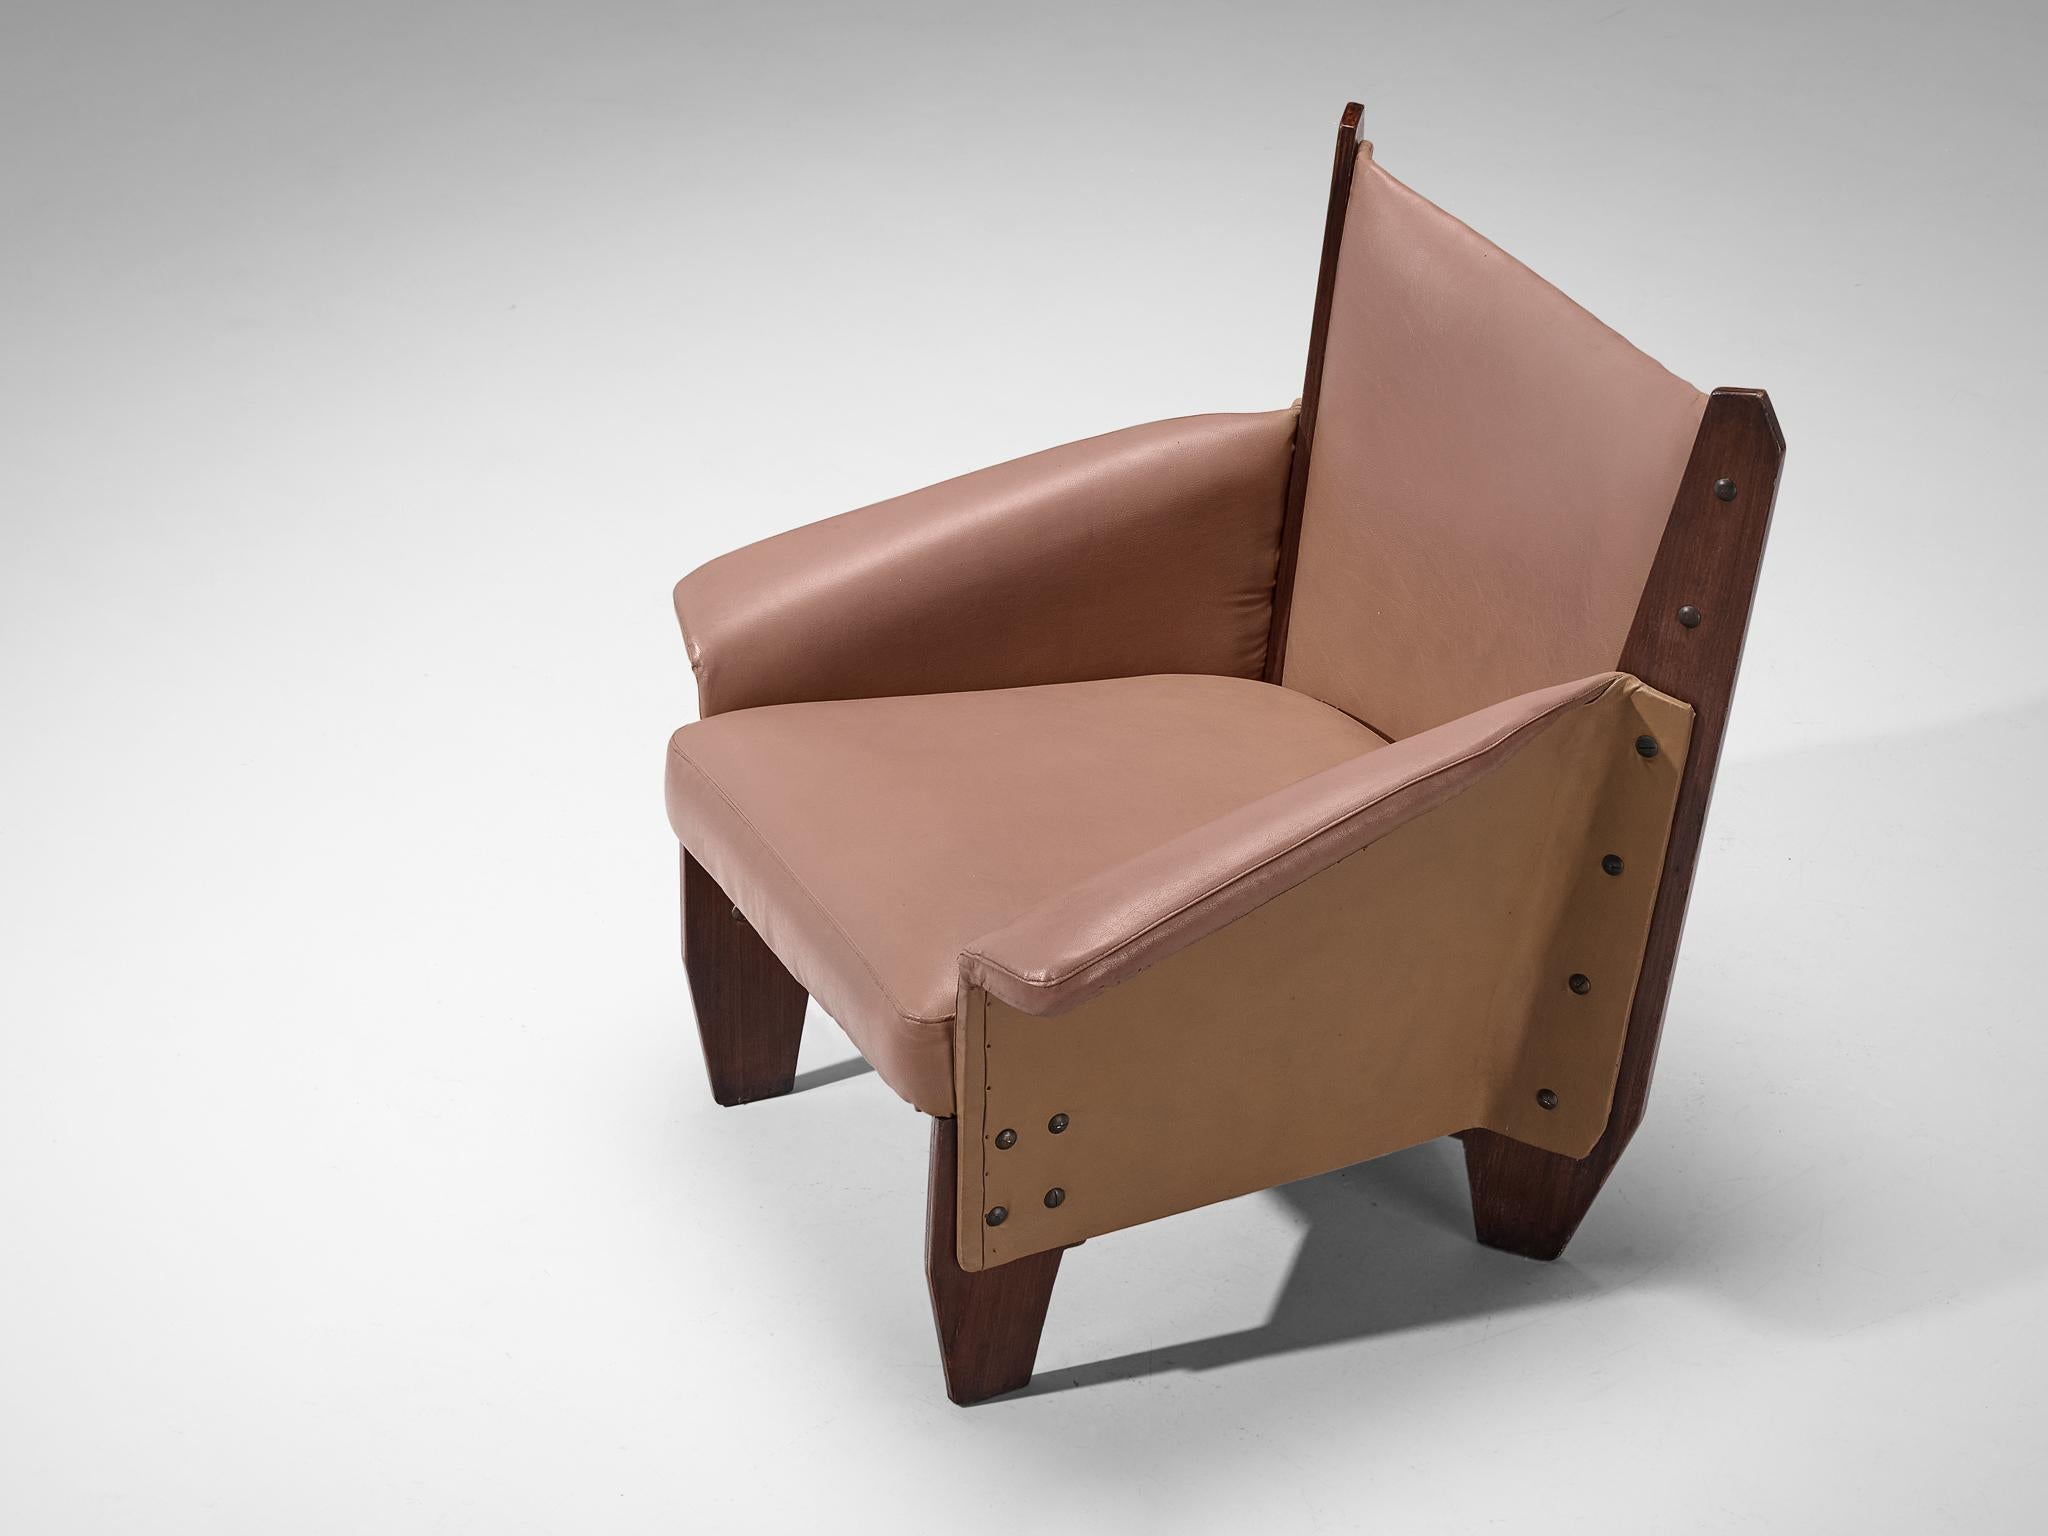 Distinct Pair of Italian Lounge Chairs in Plywood and Camel Pink Upholstery